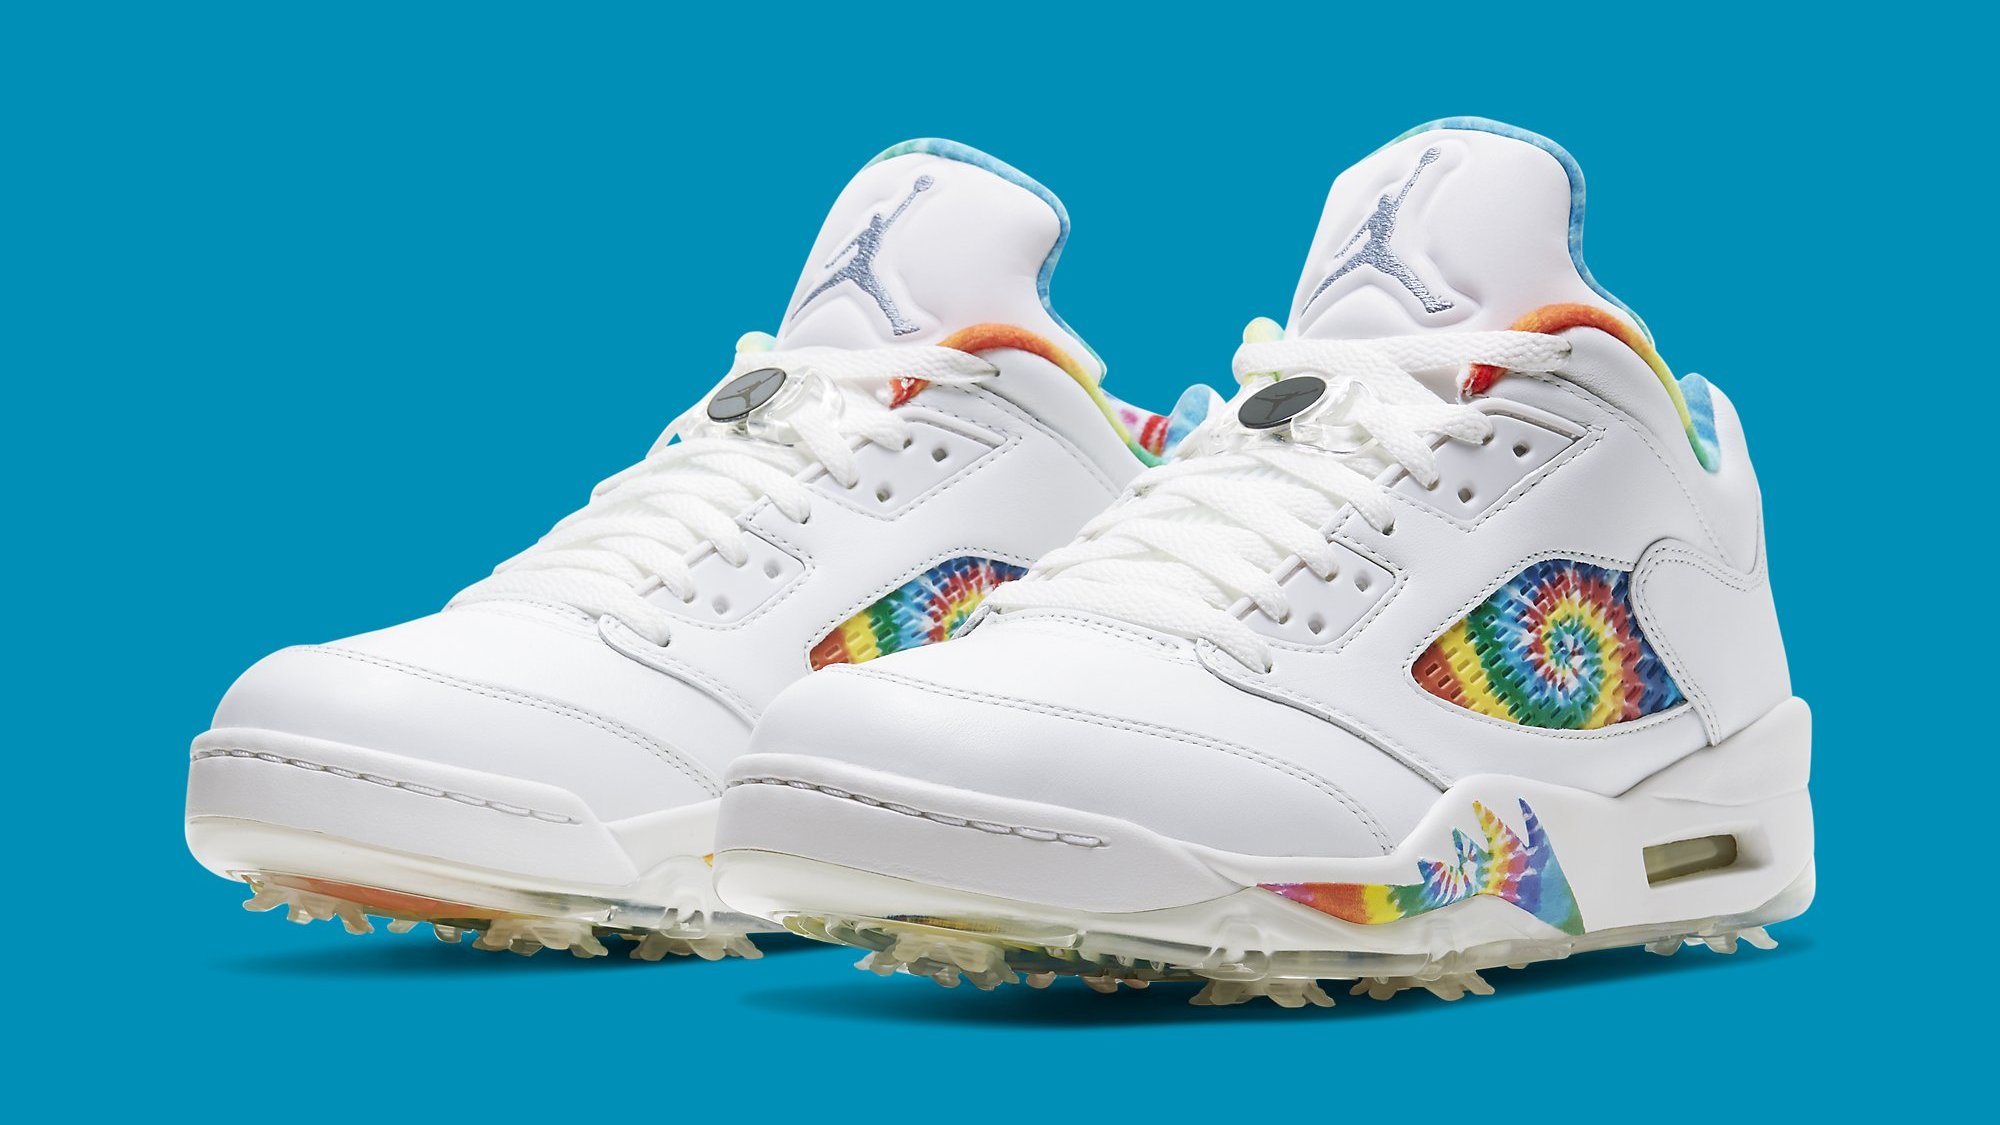 The Air Jordan 5 Golf Is Getting a Groovy Makeover | Complex